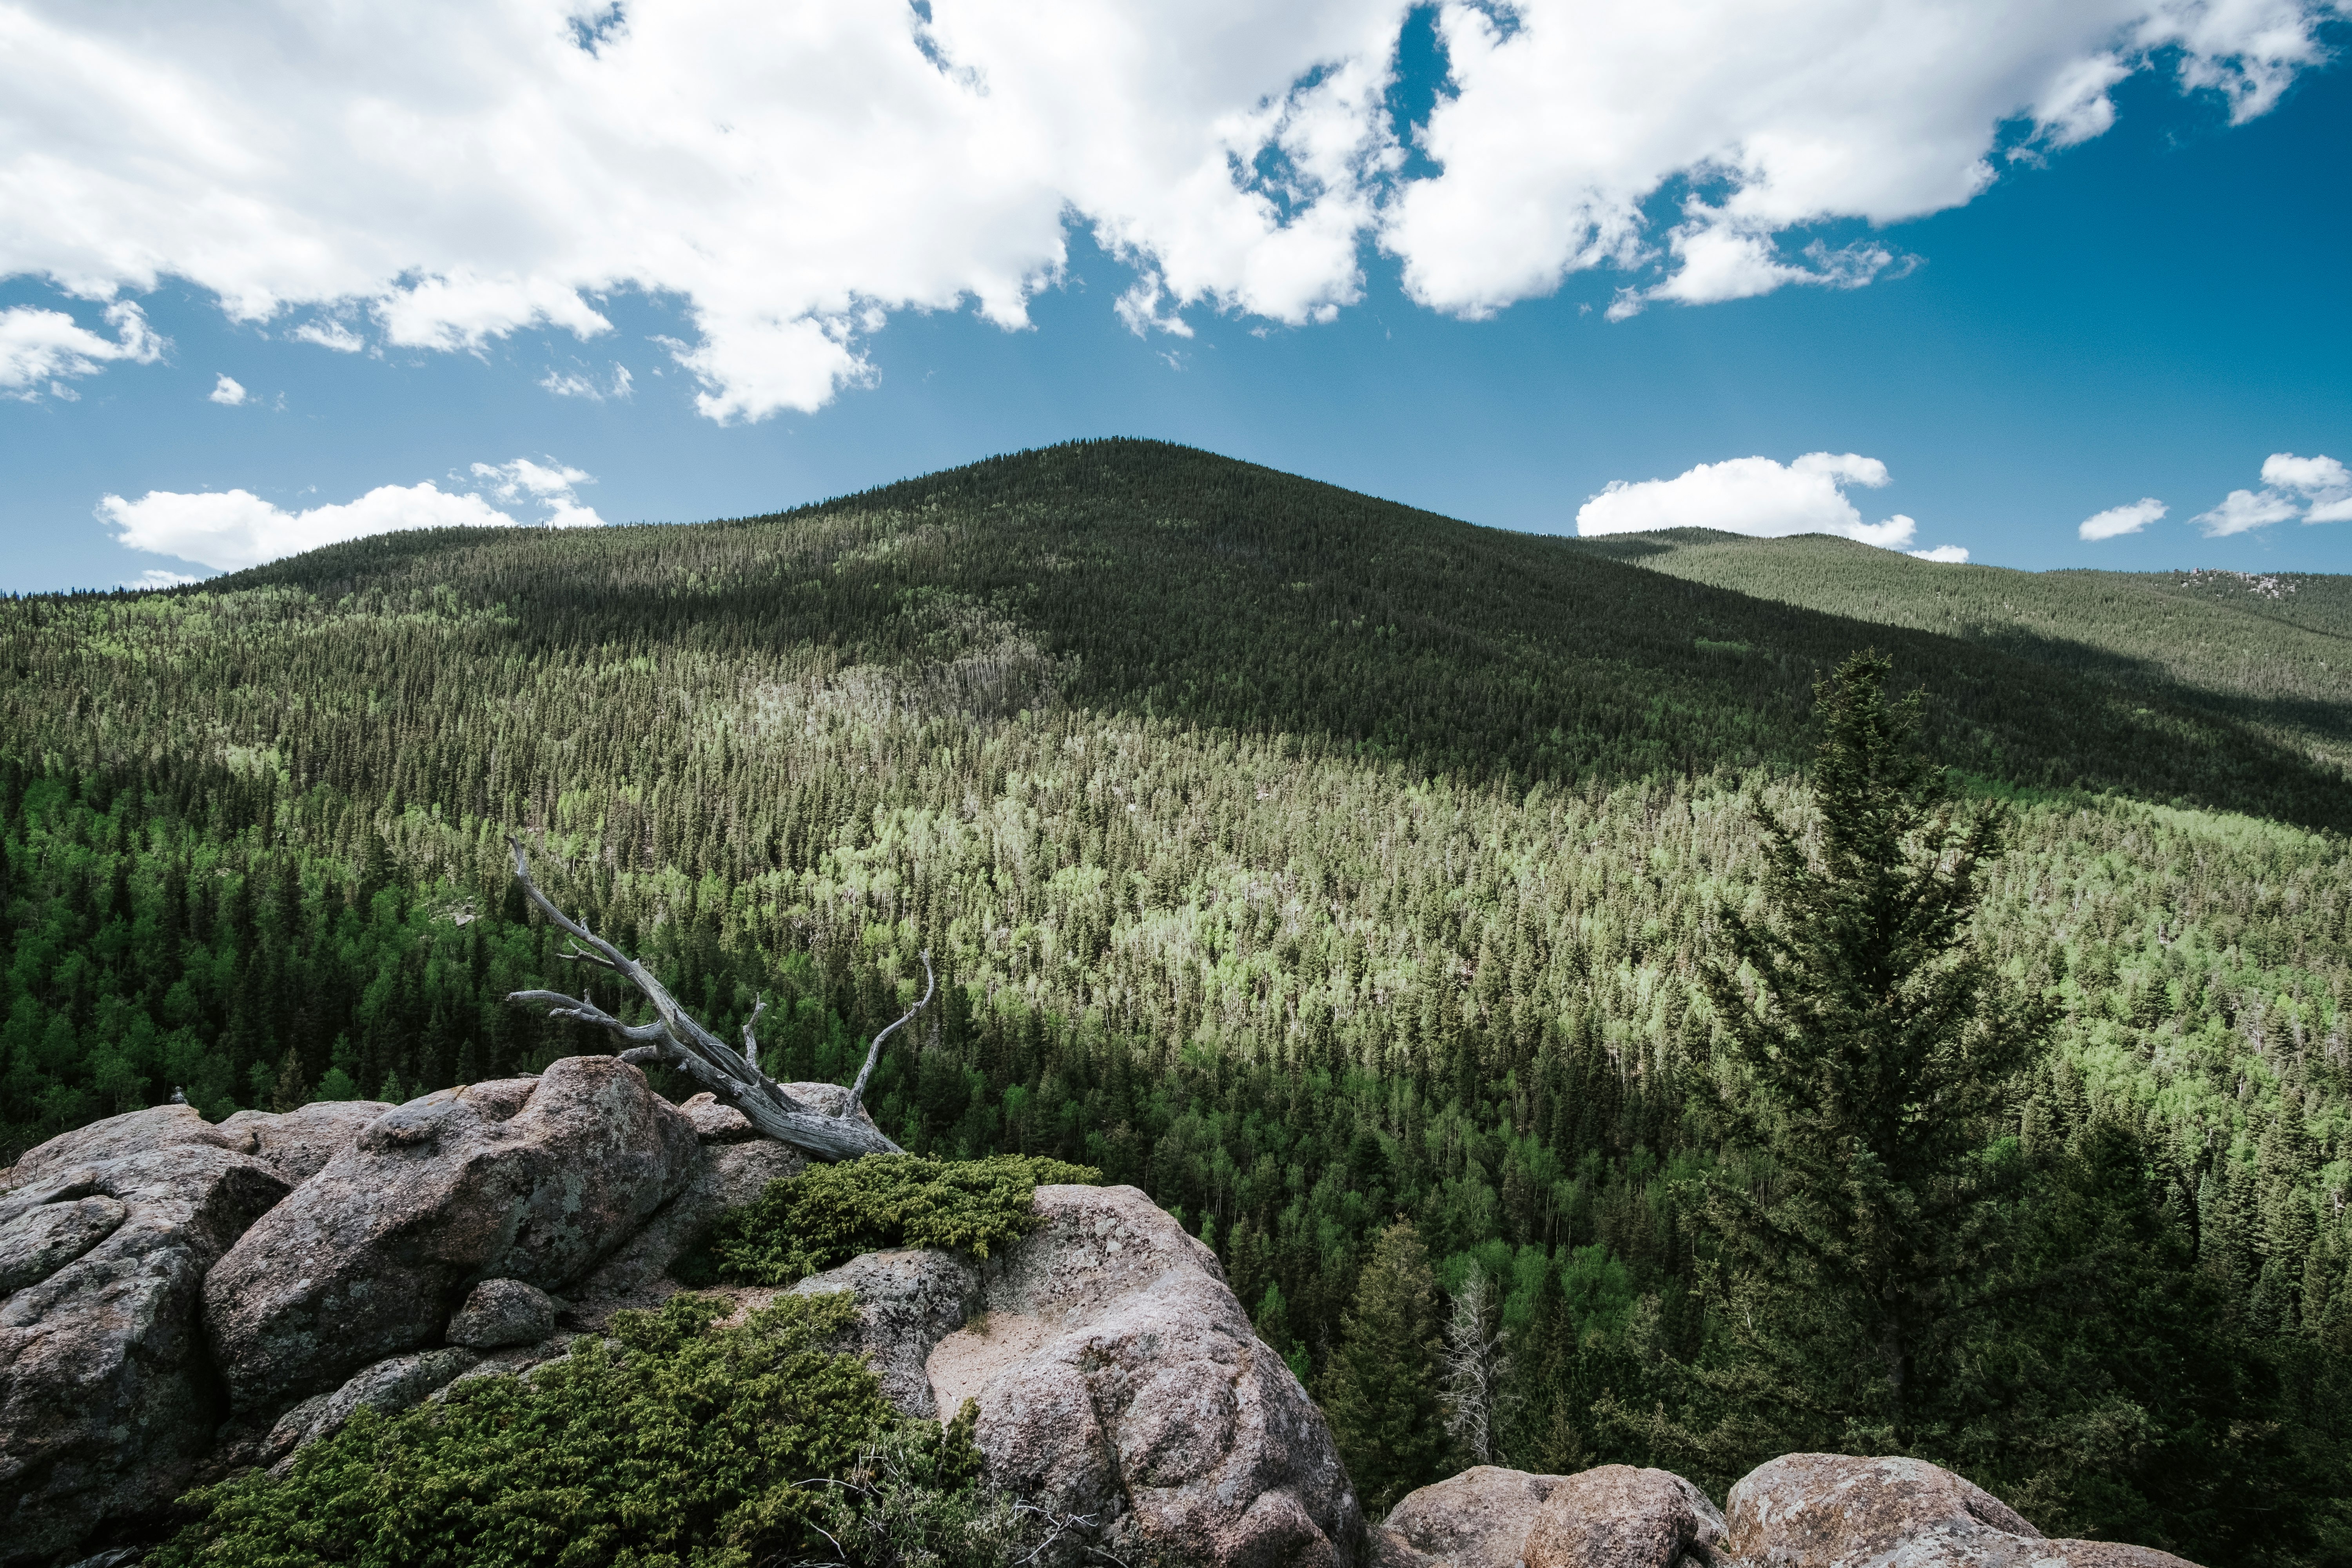 After a day of hiking we reach the top of a boulder pile and to the southwest lies Buffalo Peak in the Lost Creek Wilderness. With the dead tree, the clouds casting their shadows, and a beautiful setting stretched out before us, I had to snag this shot!